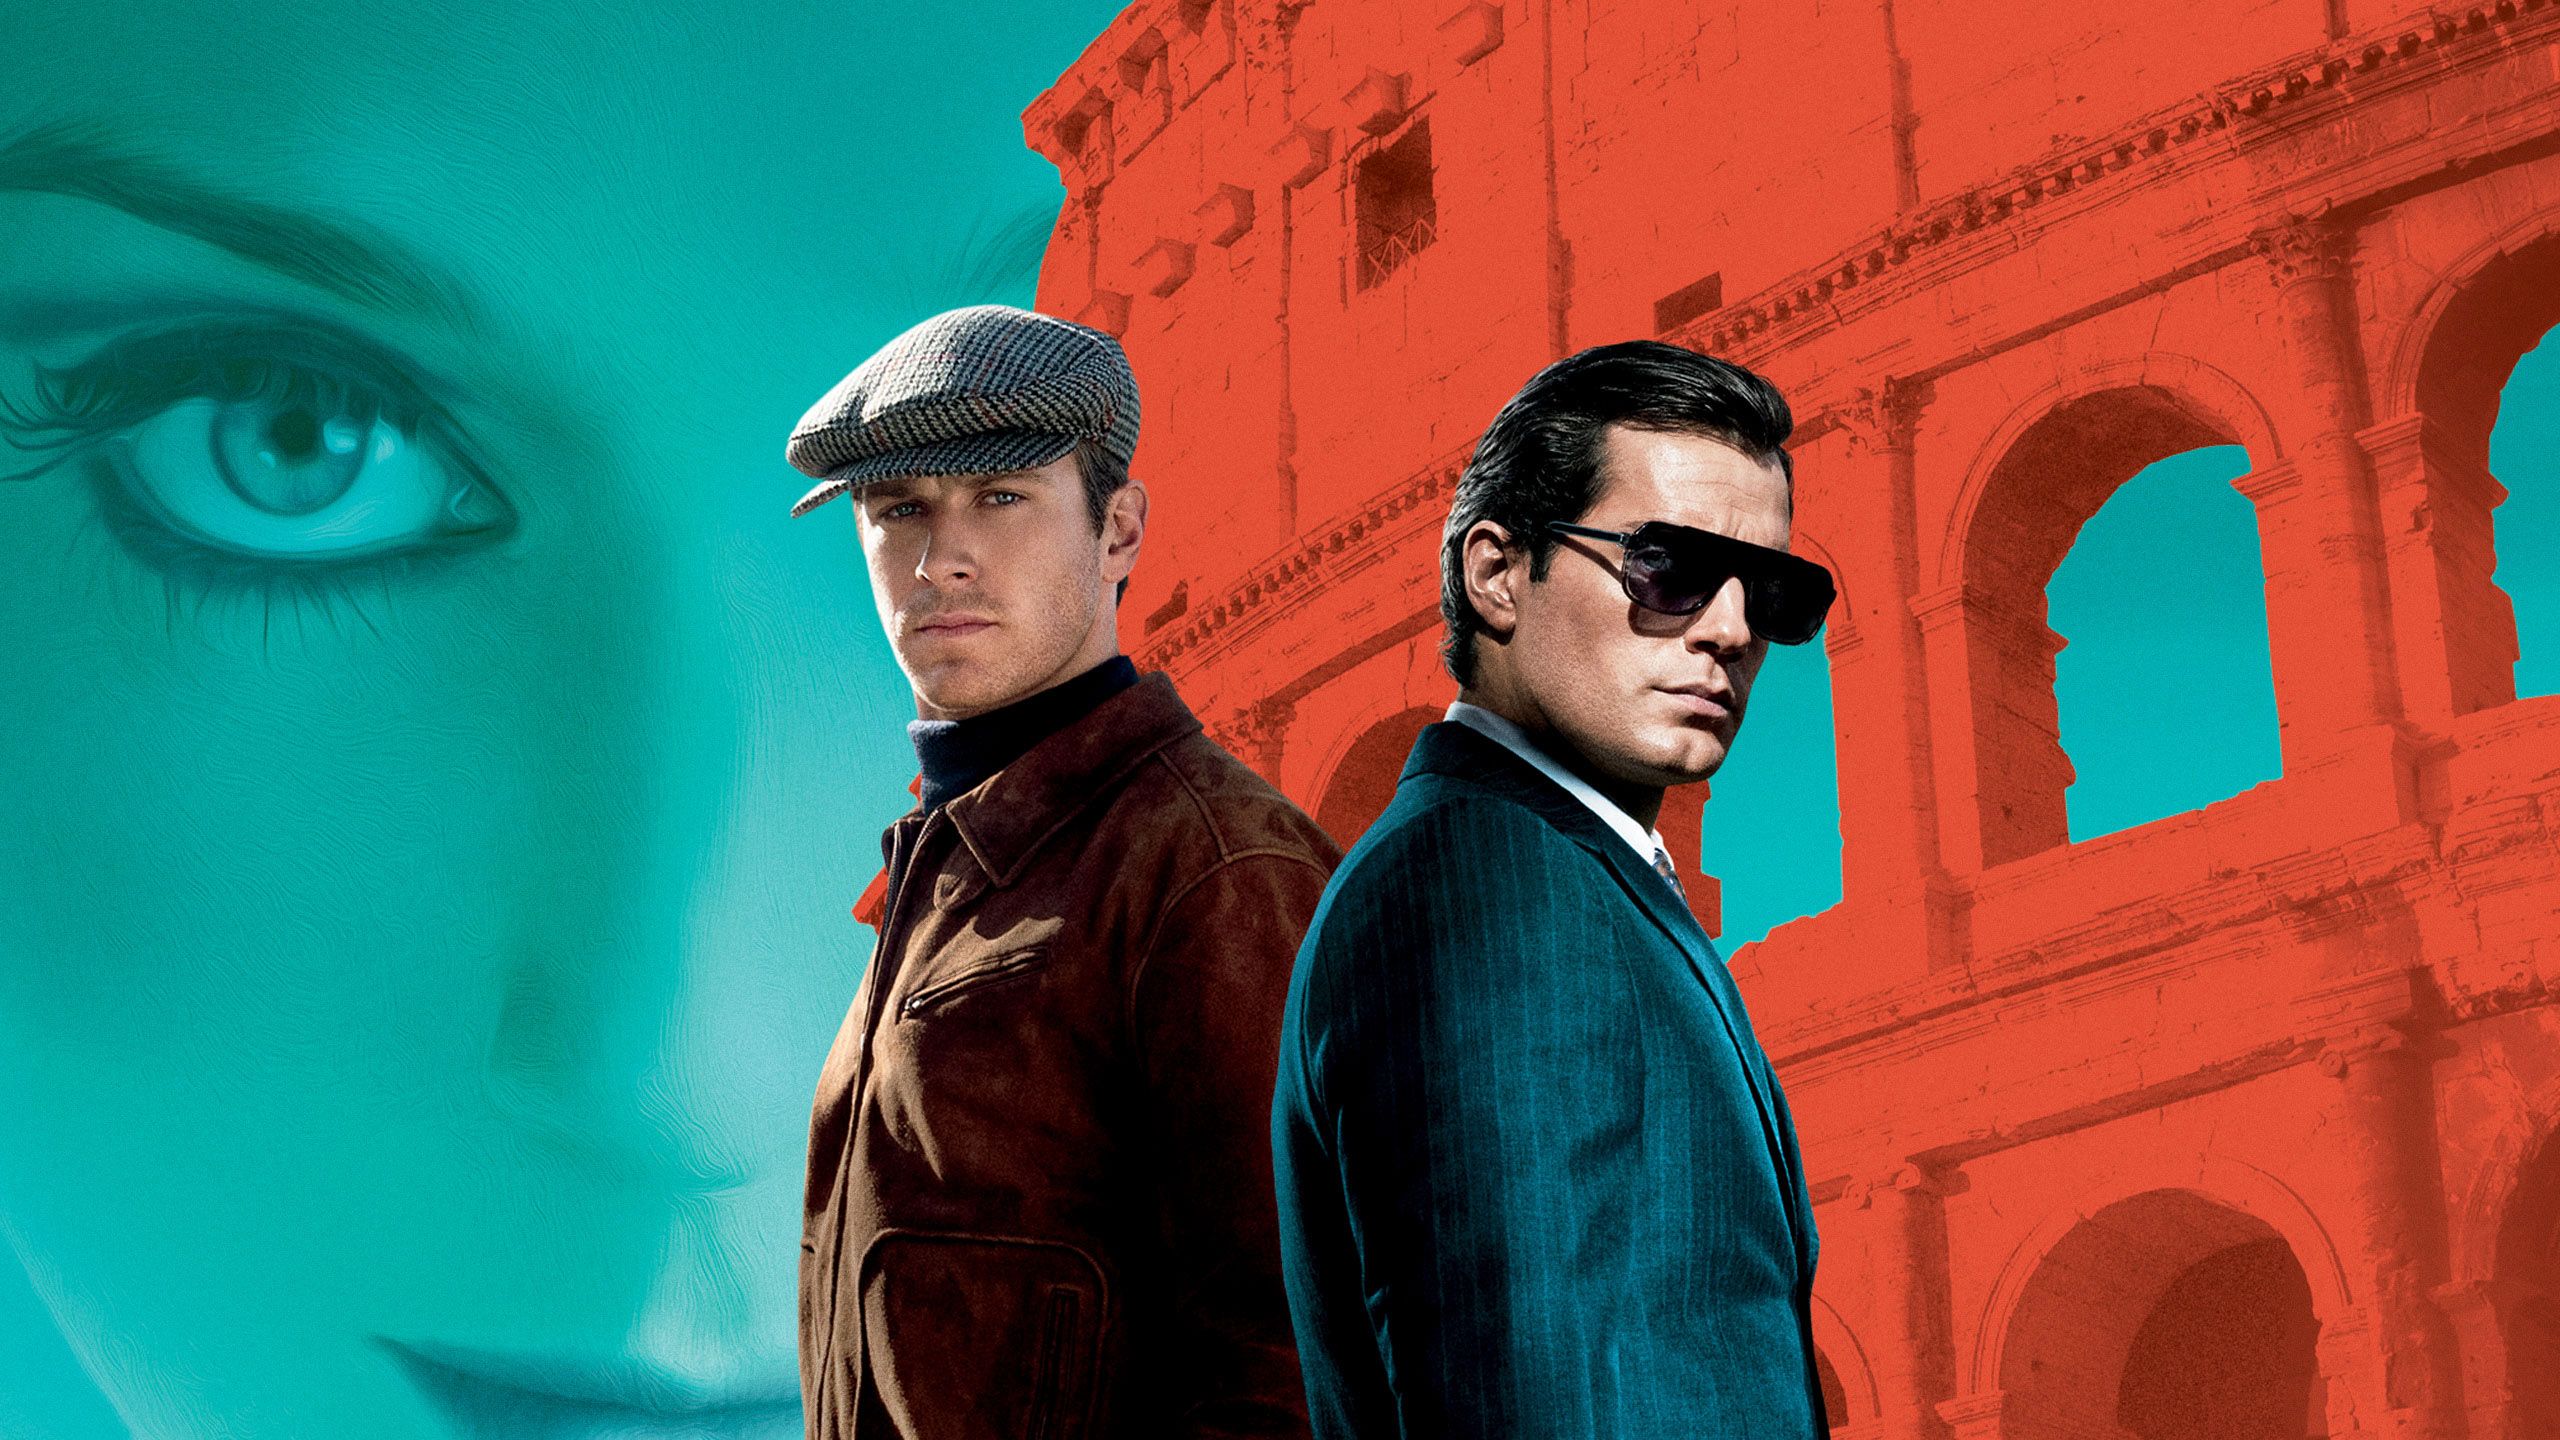 Purchase The Man from U.N.C.L.E. on digital and stream instantly or downloa...